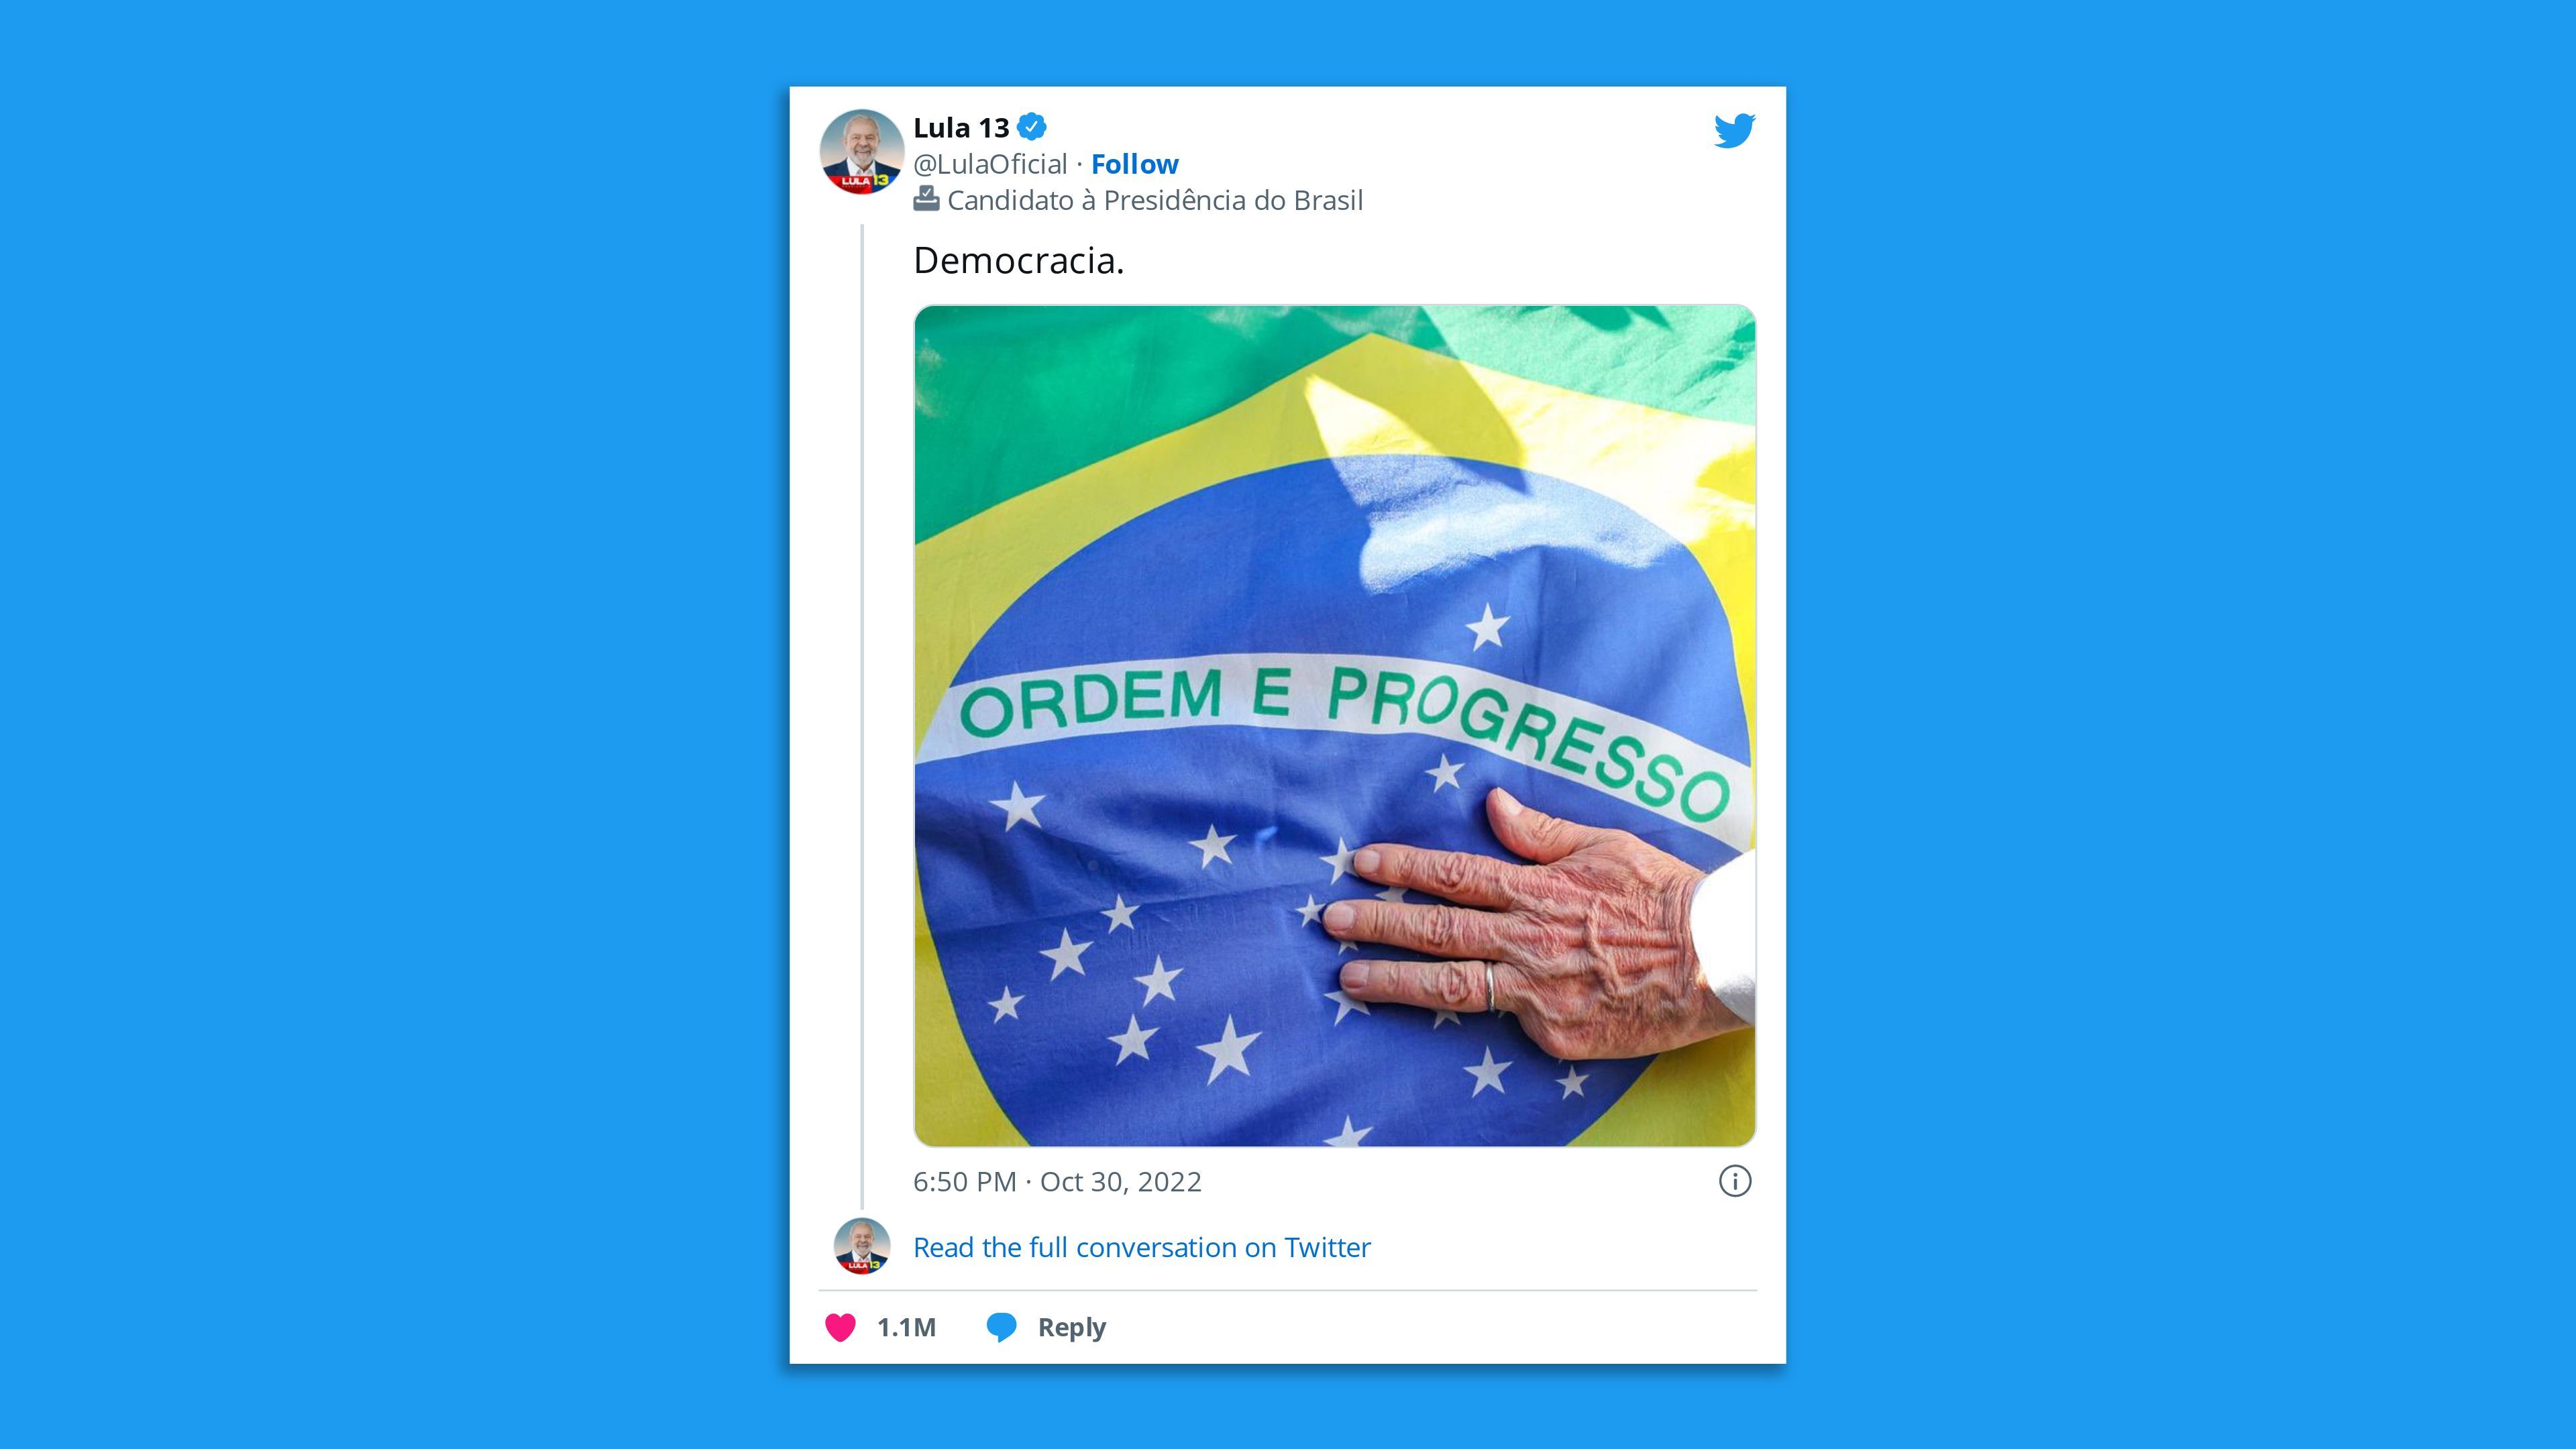 A tweet from newly elected President Lula saying "Democracia."